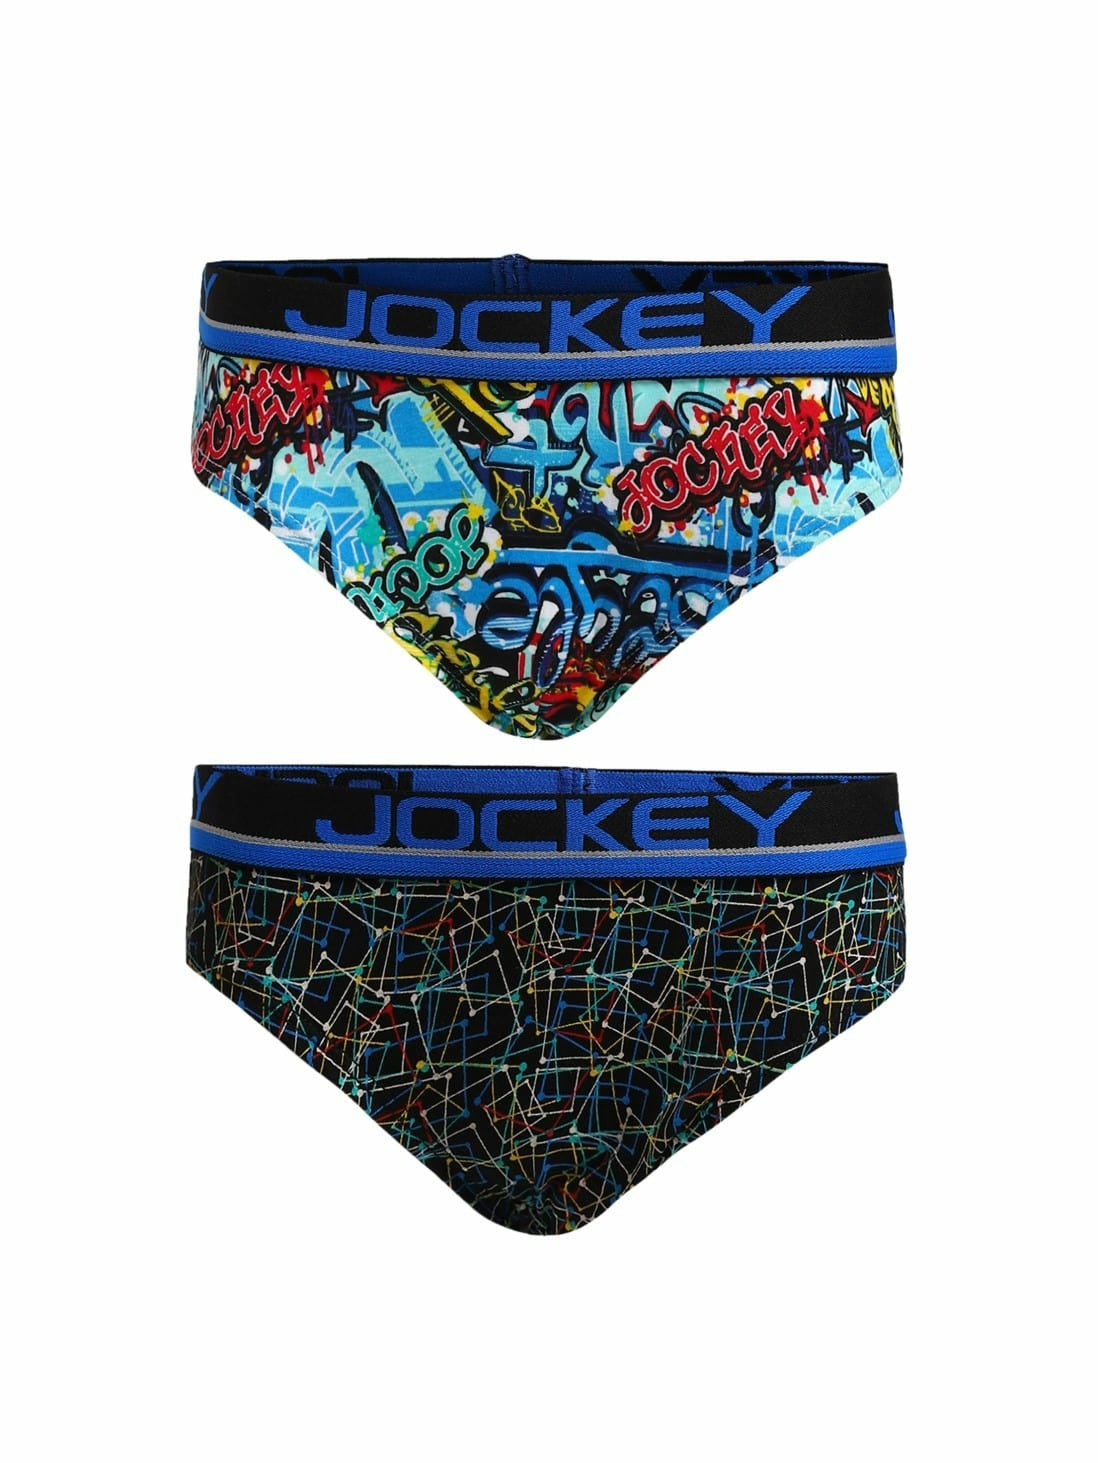 Boys Assorted Color & Prints Brief Pack of 2